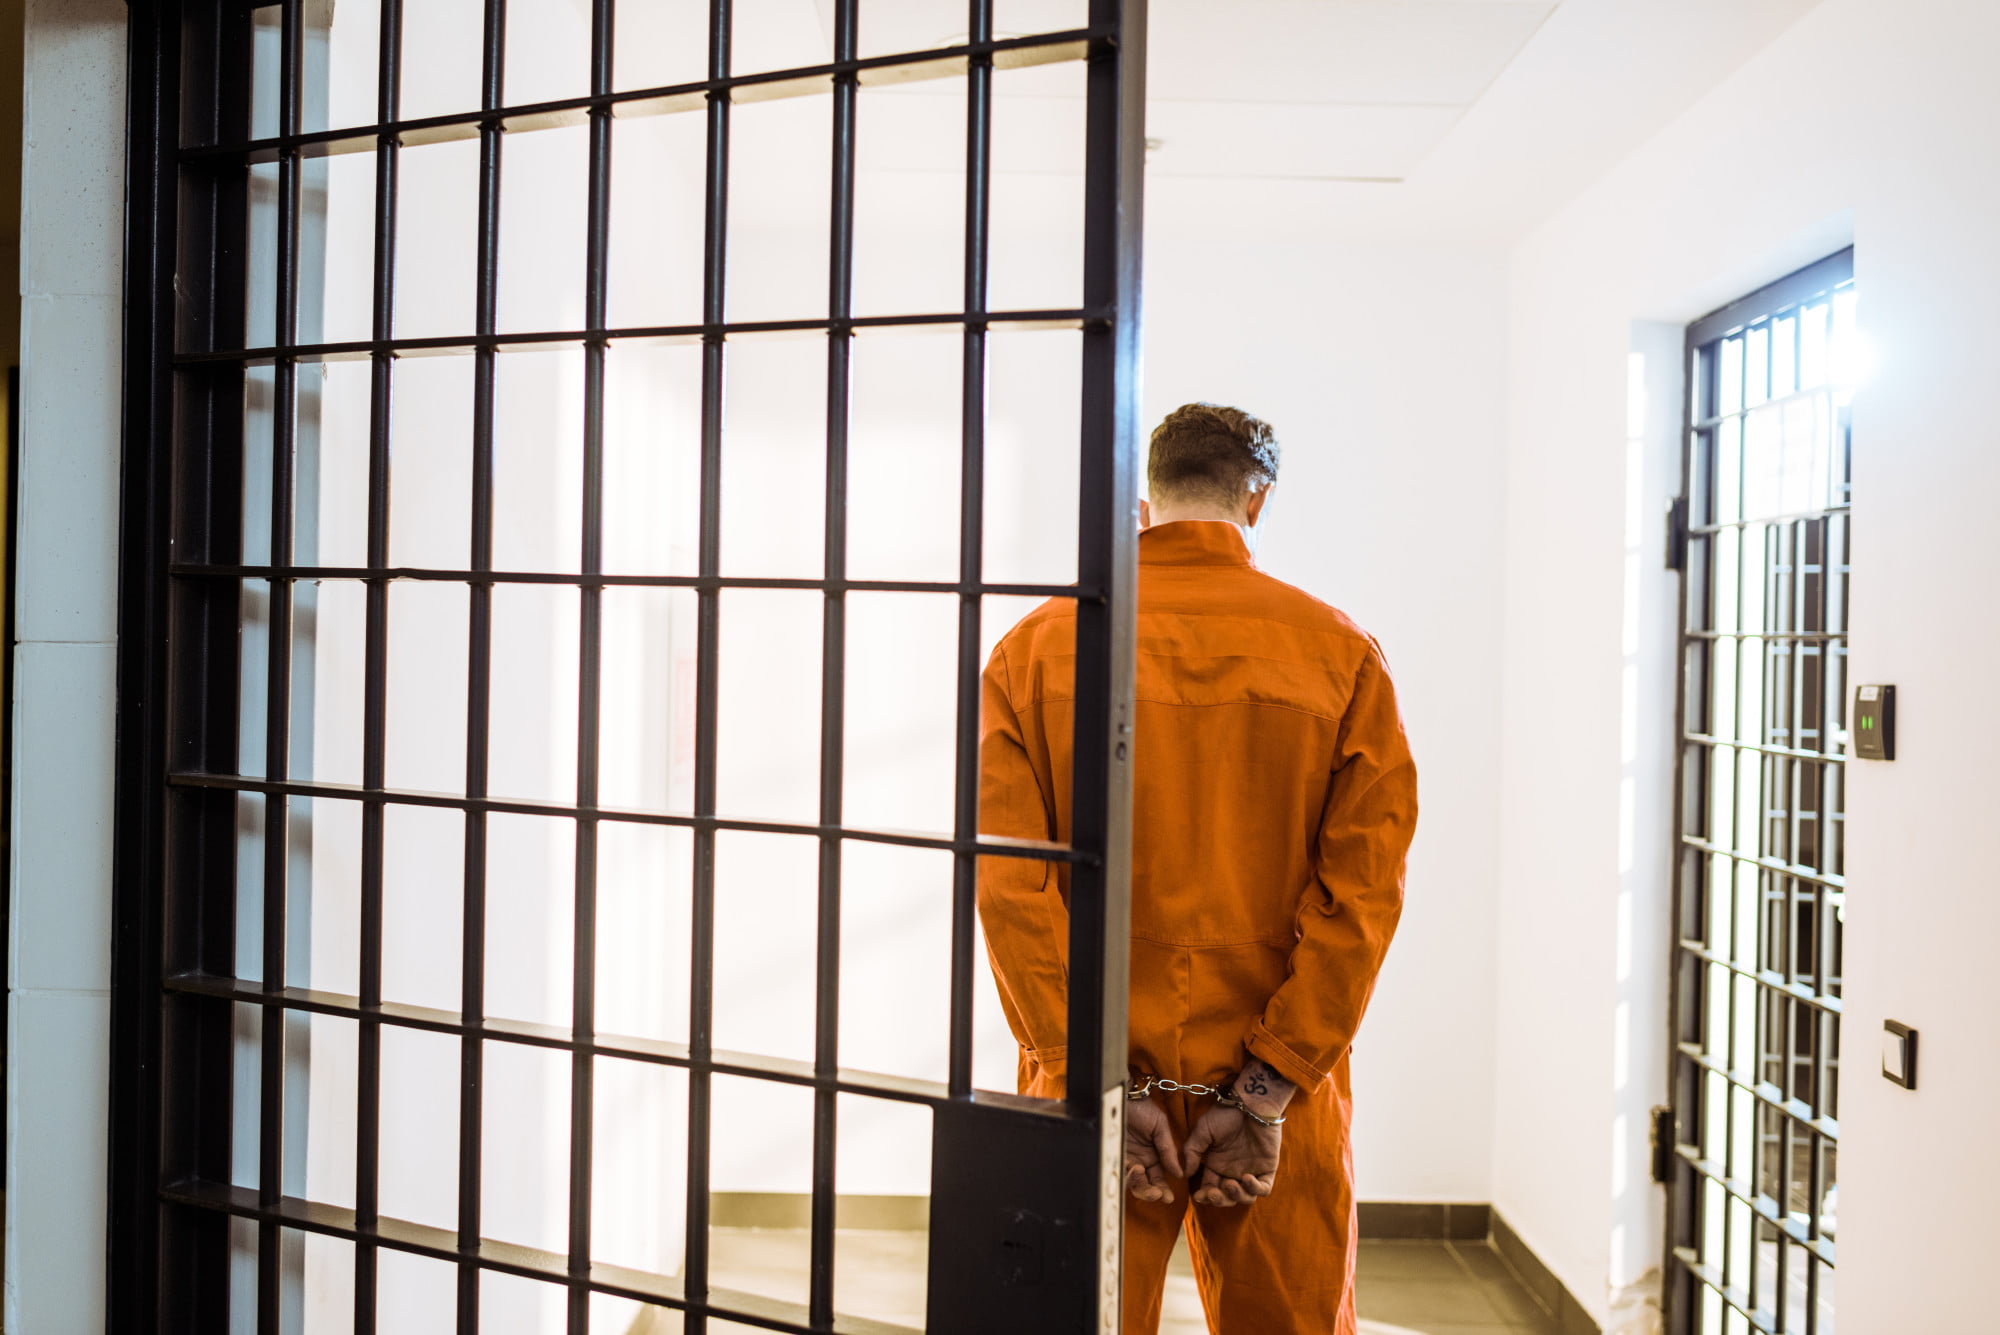 County jail vs prison: How much do you know about the differences between the two? Read on to learn more about the differences between them.